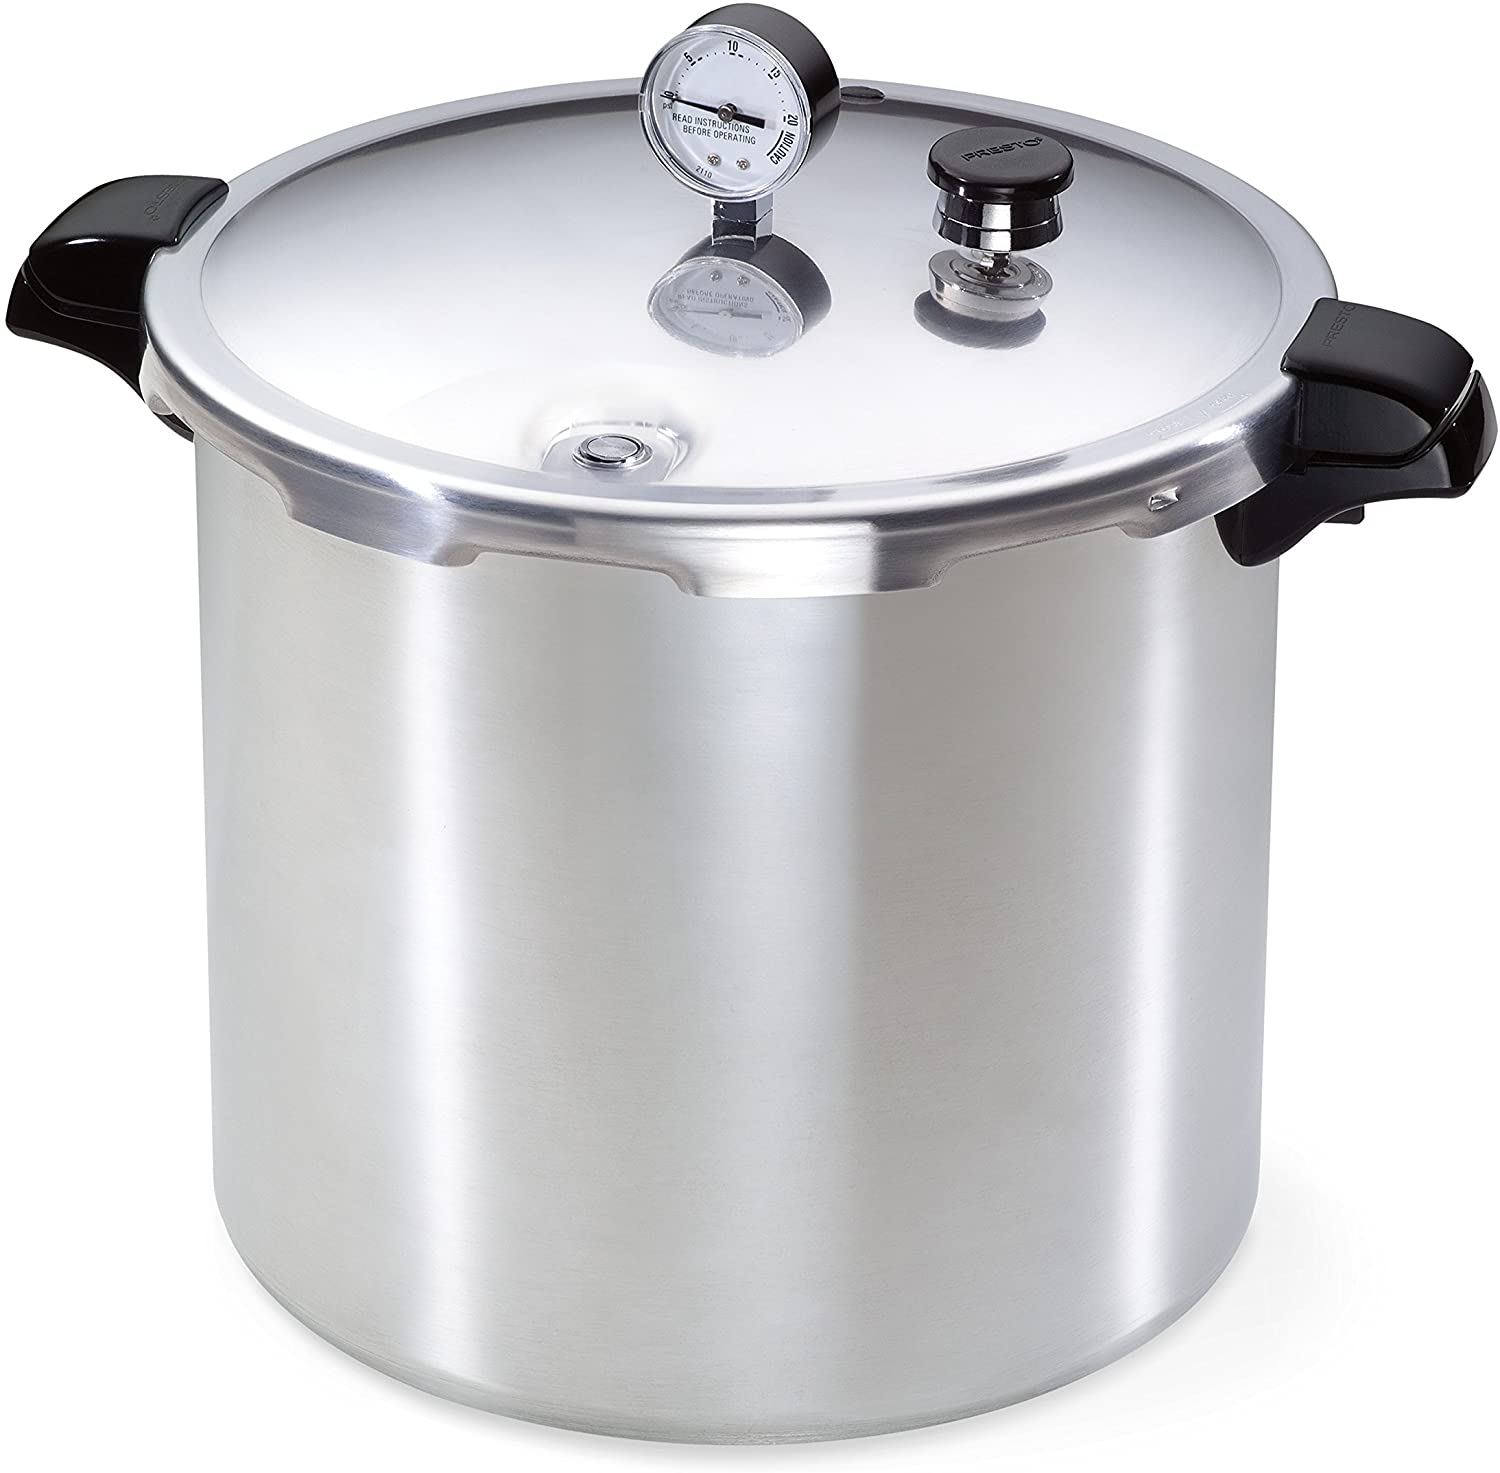 Part 92140A(92140) Pressure Cooker 4 Qt, by T-fal Wearever, Single Item,  Great V 